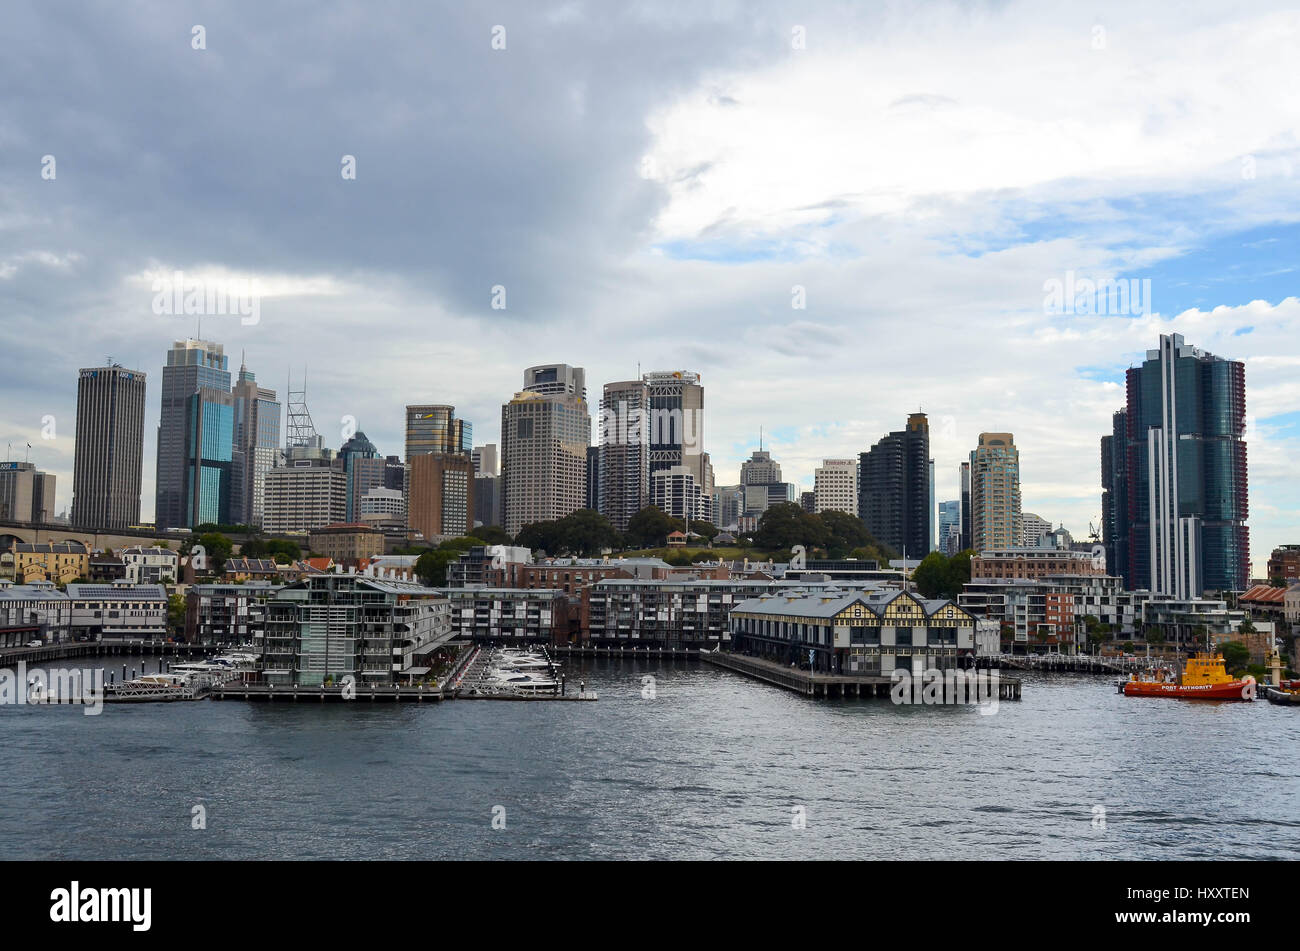 wharves and docks in sydney Stock Photo